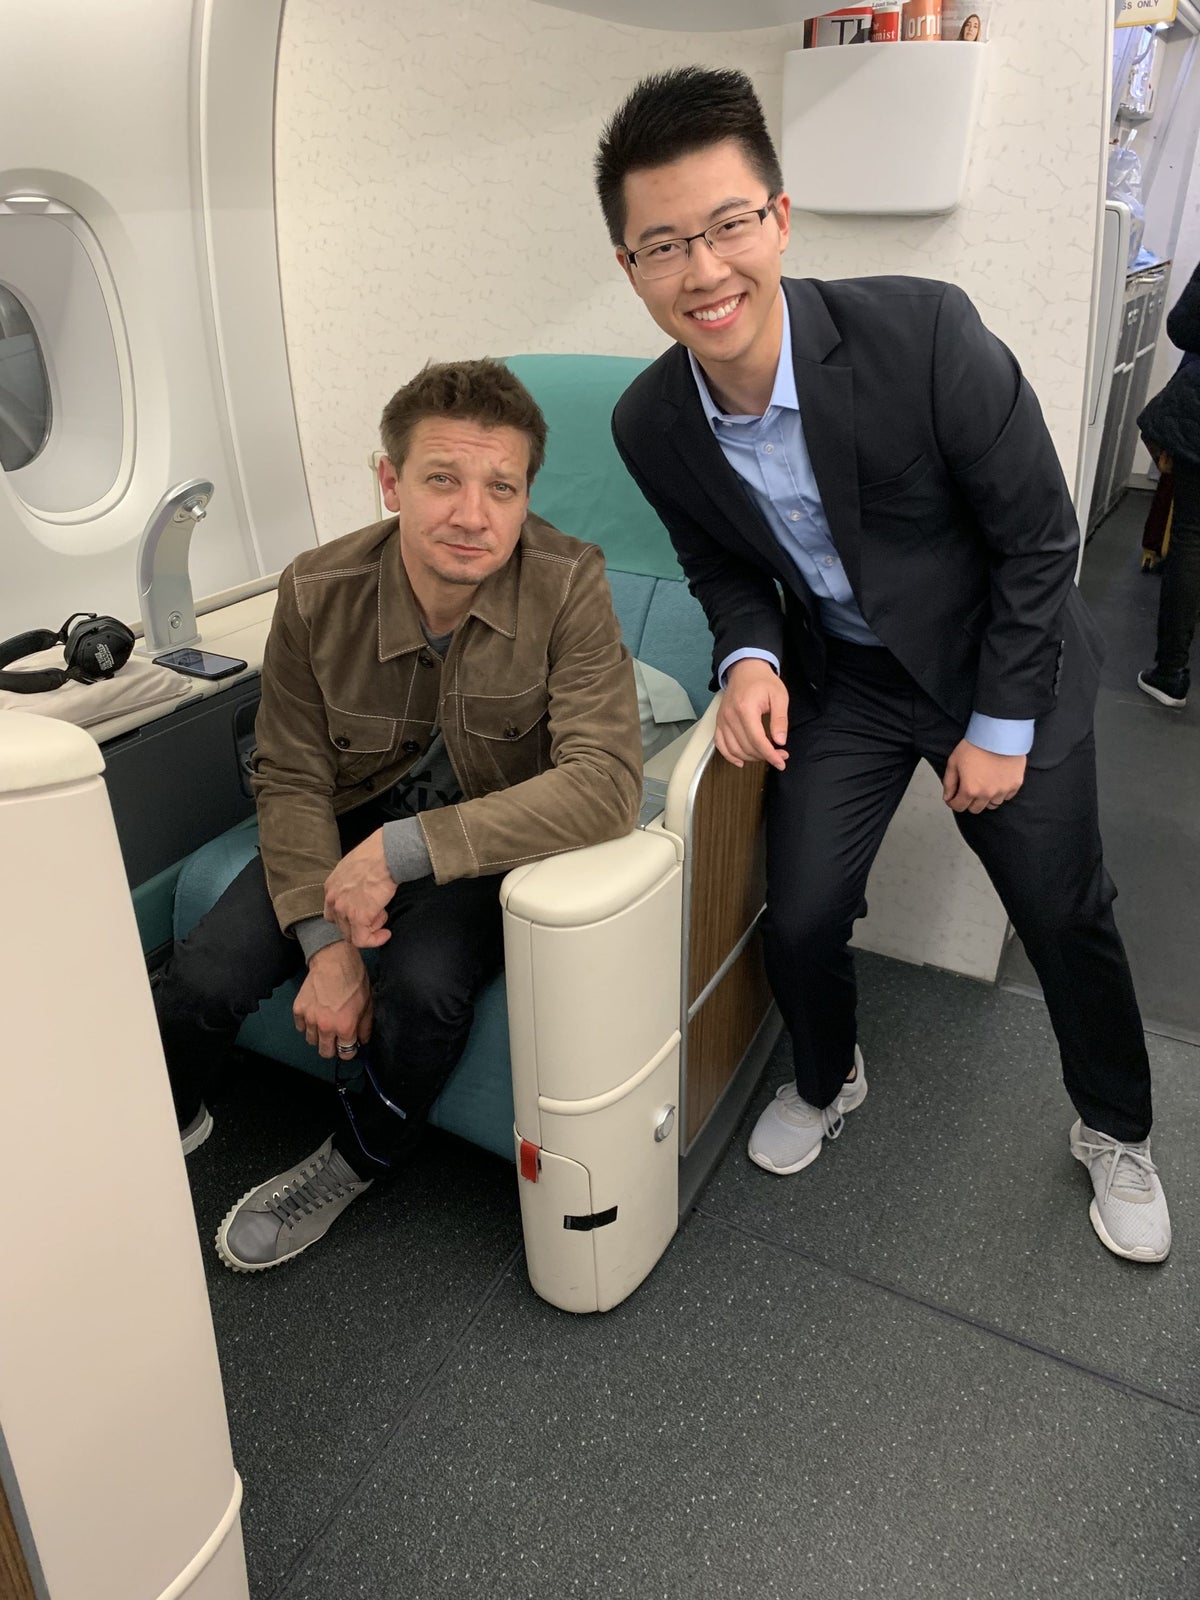 Korean Air first class with Jeremy Renner